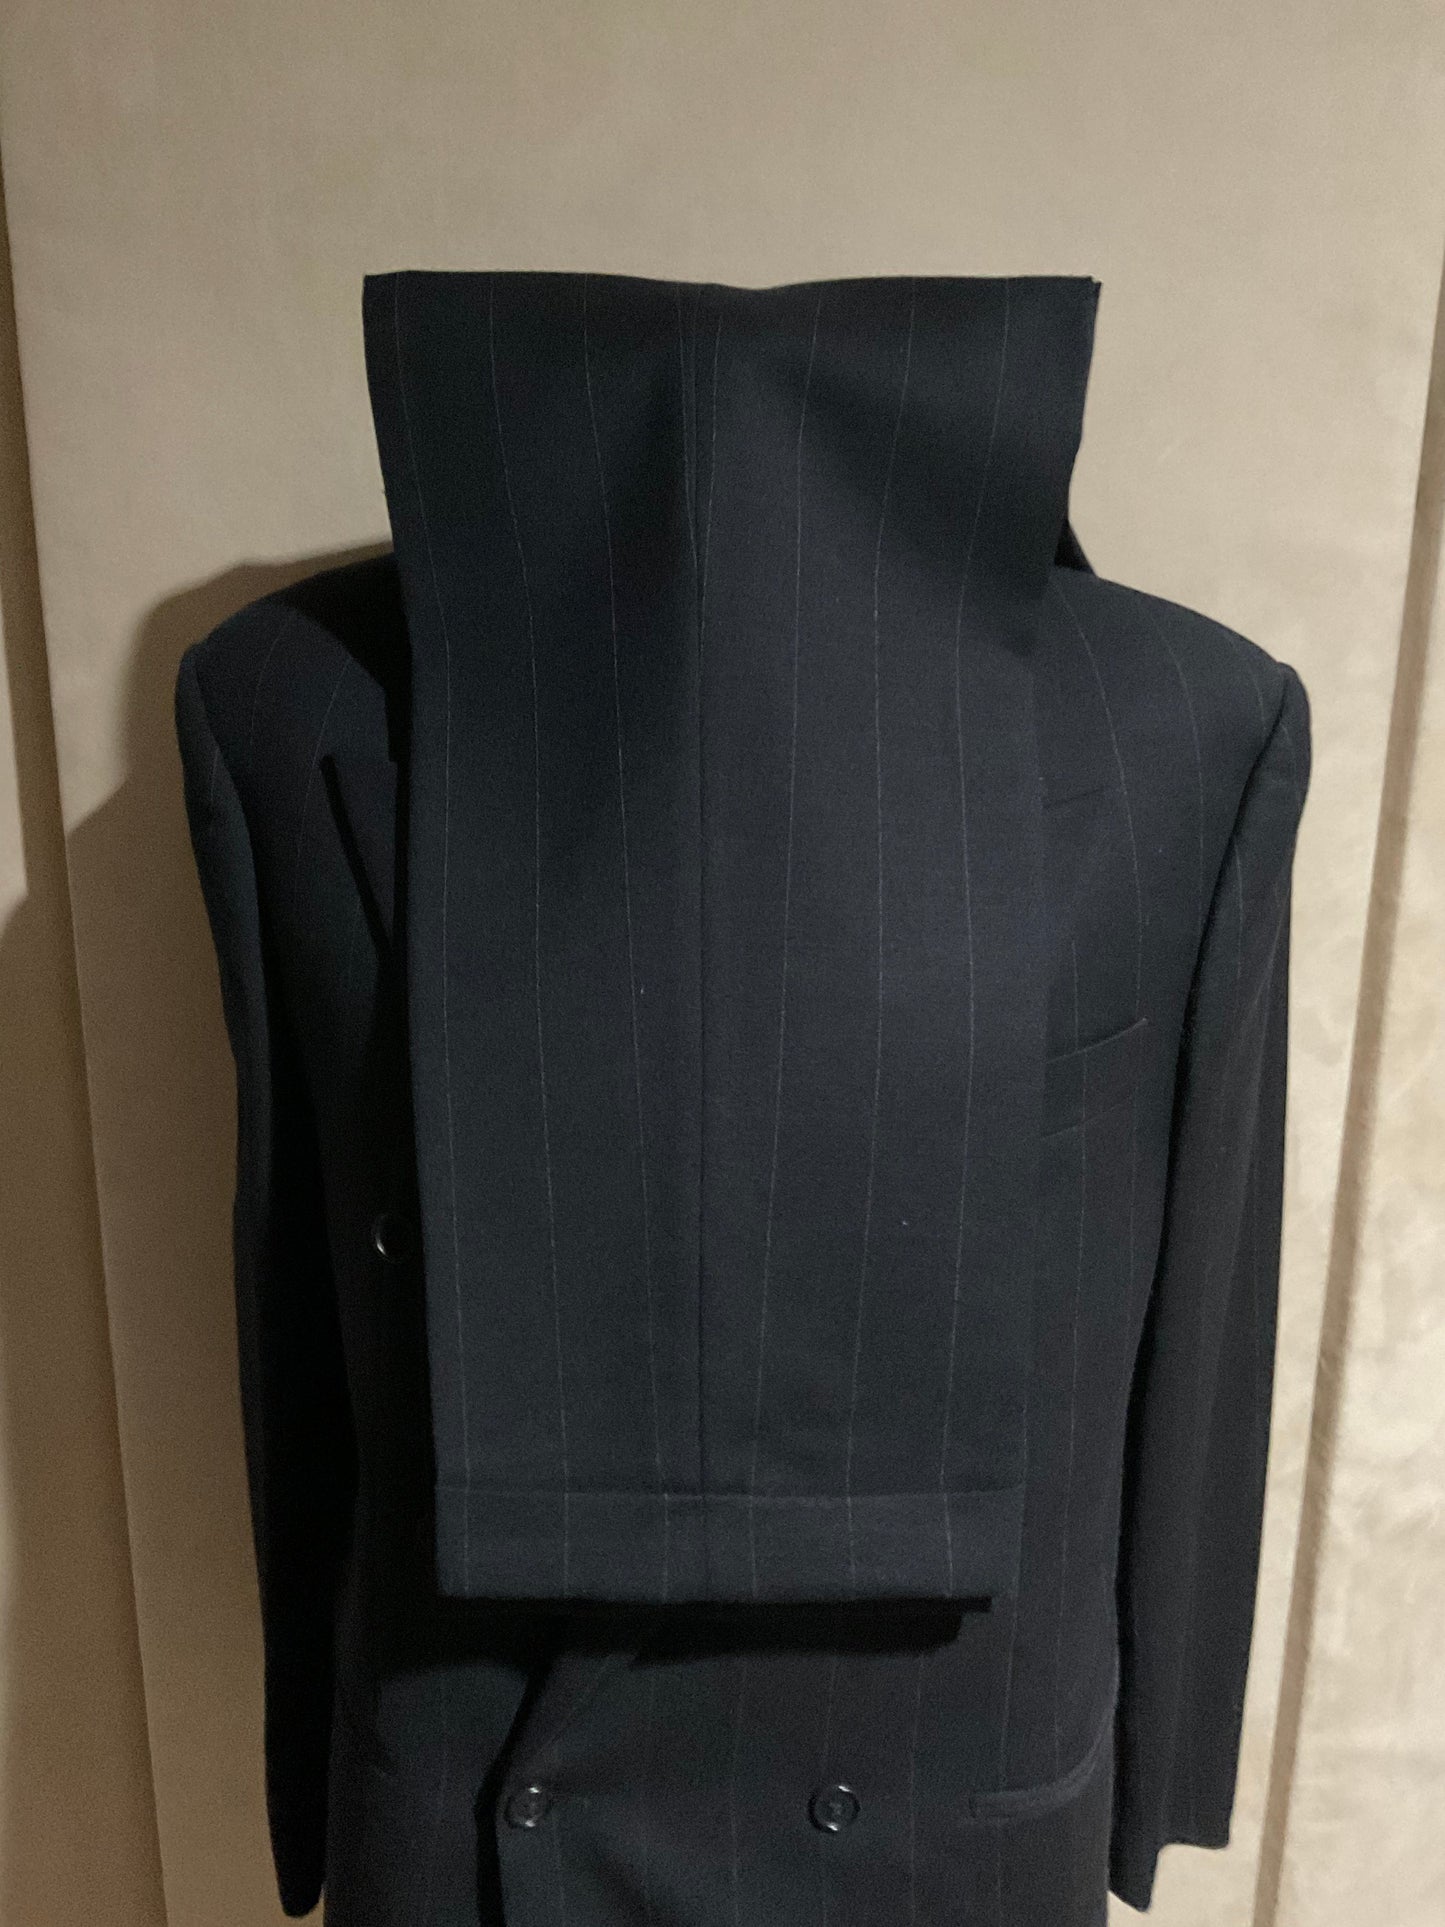 R P SUIT / DOUBLE BREASTED / NAVY STRIPE CREPE / 38 REG / MADE IN ITALY